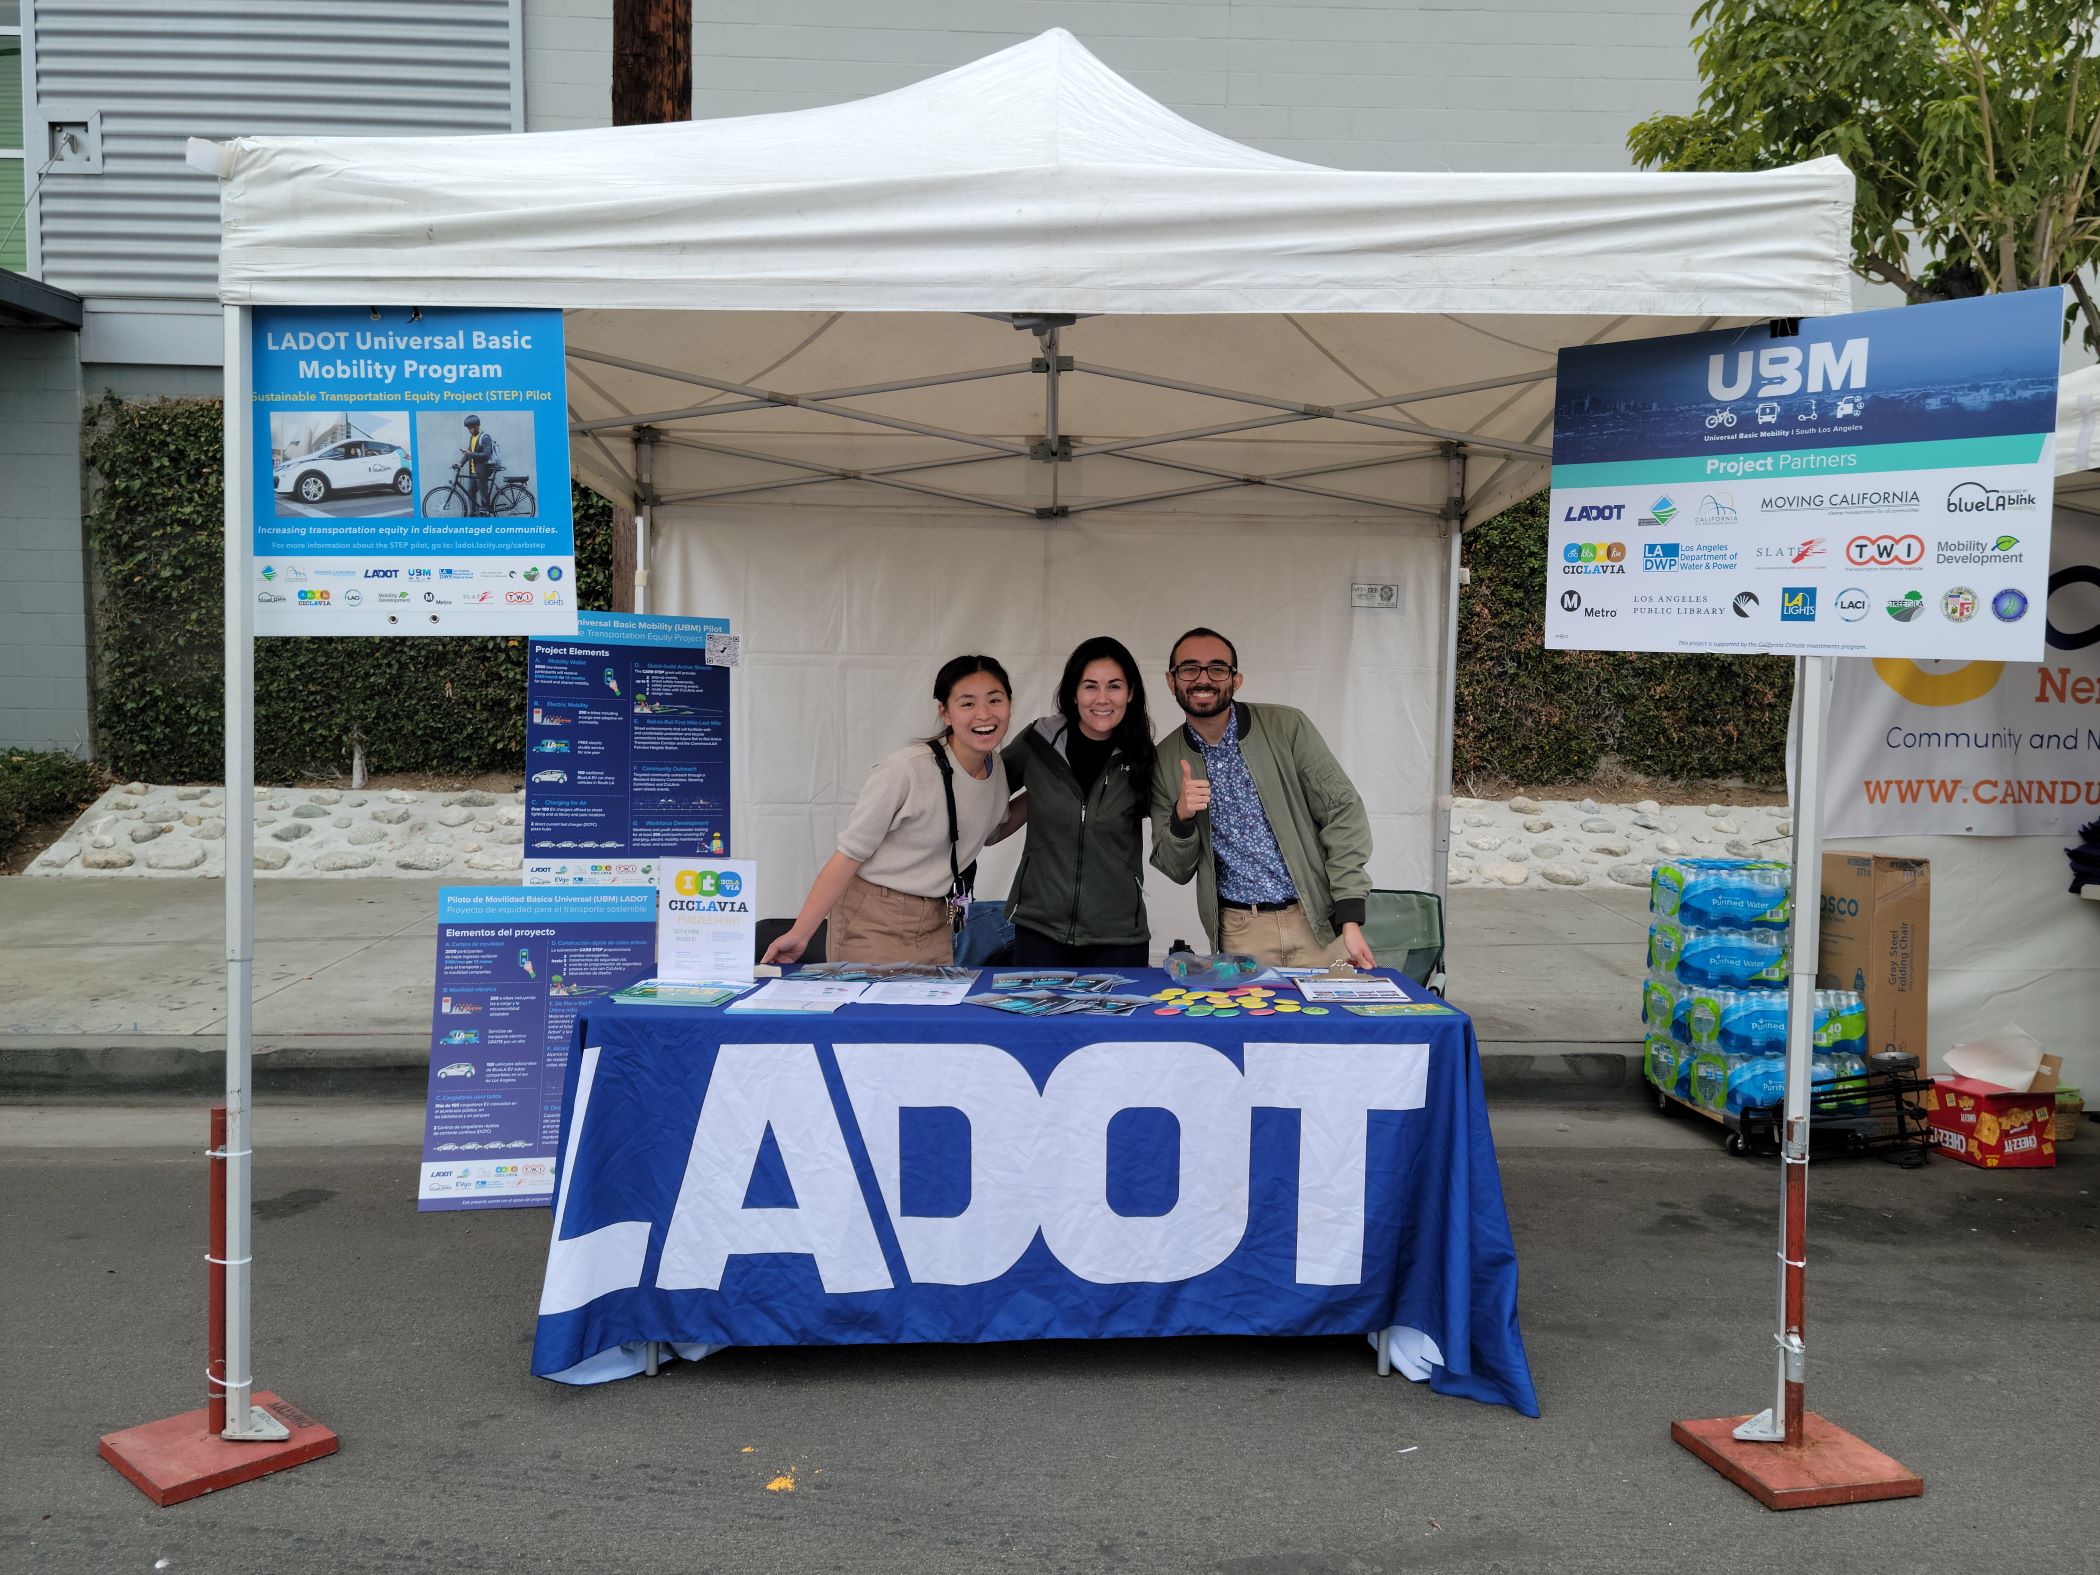 Staff from LADOT universal Basic Mobility program behind the LADOT Table